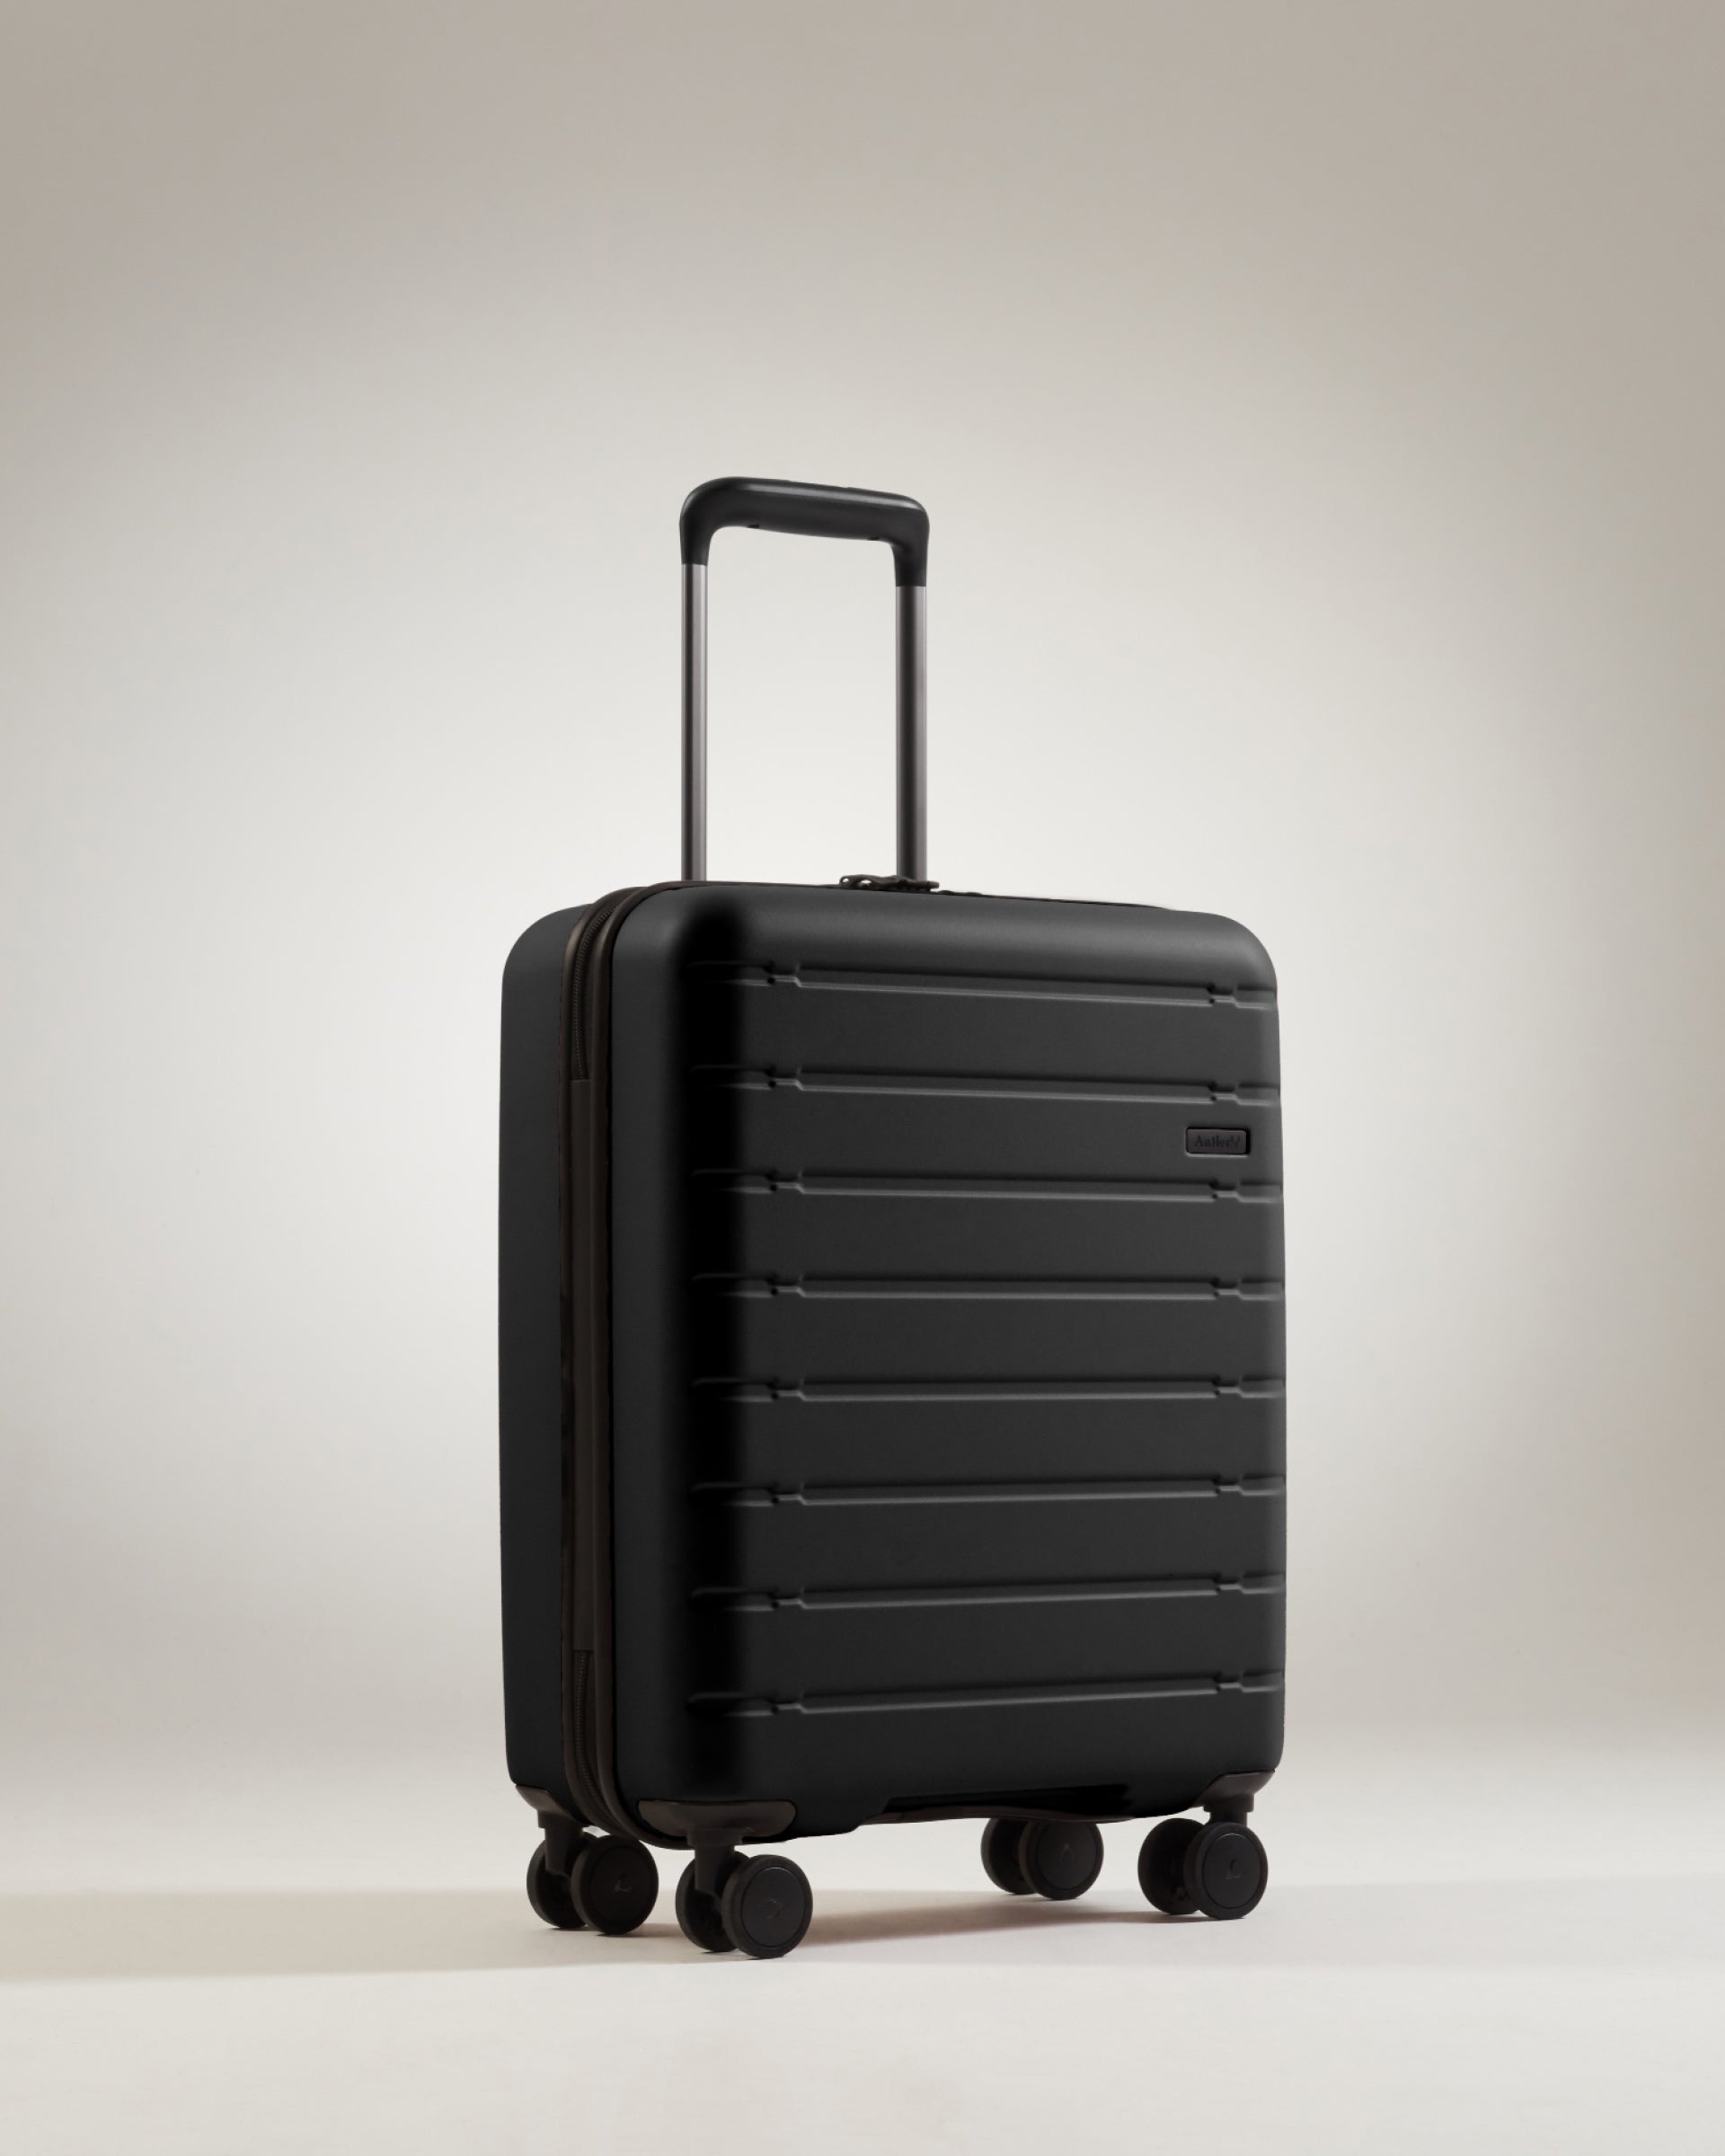 Carry-On Luggage - Hand Luggage & Cabin Luggage